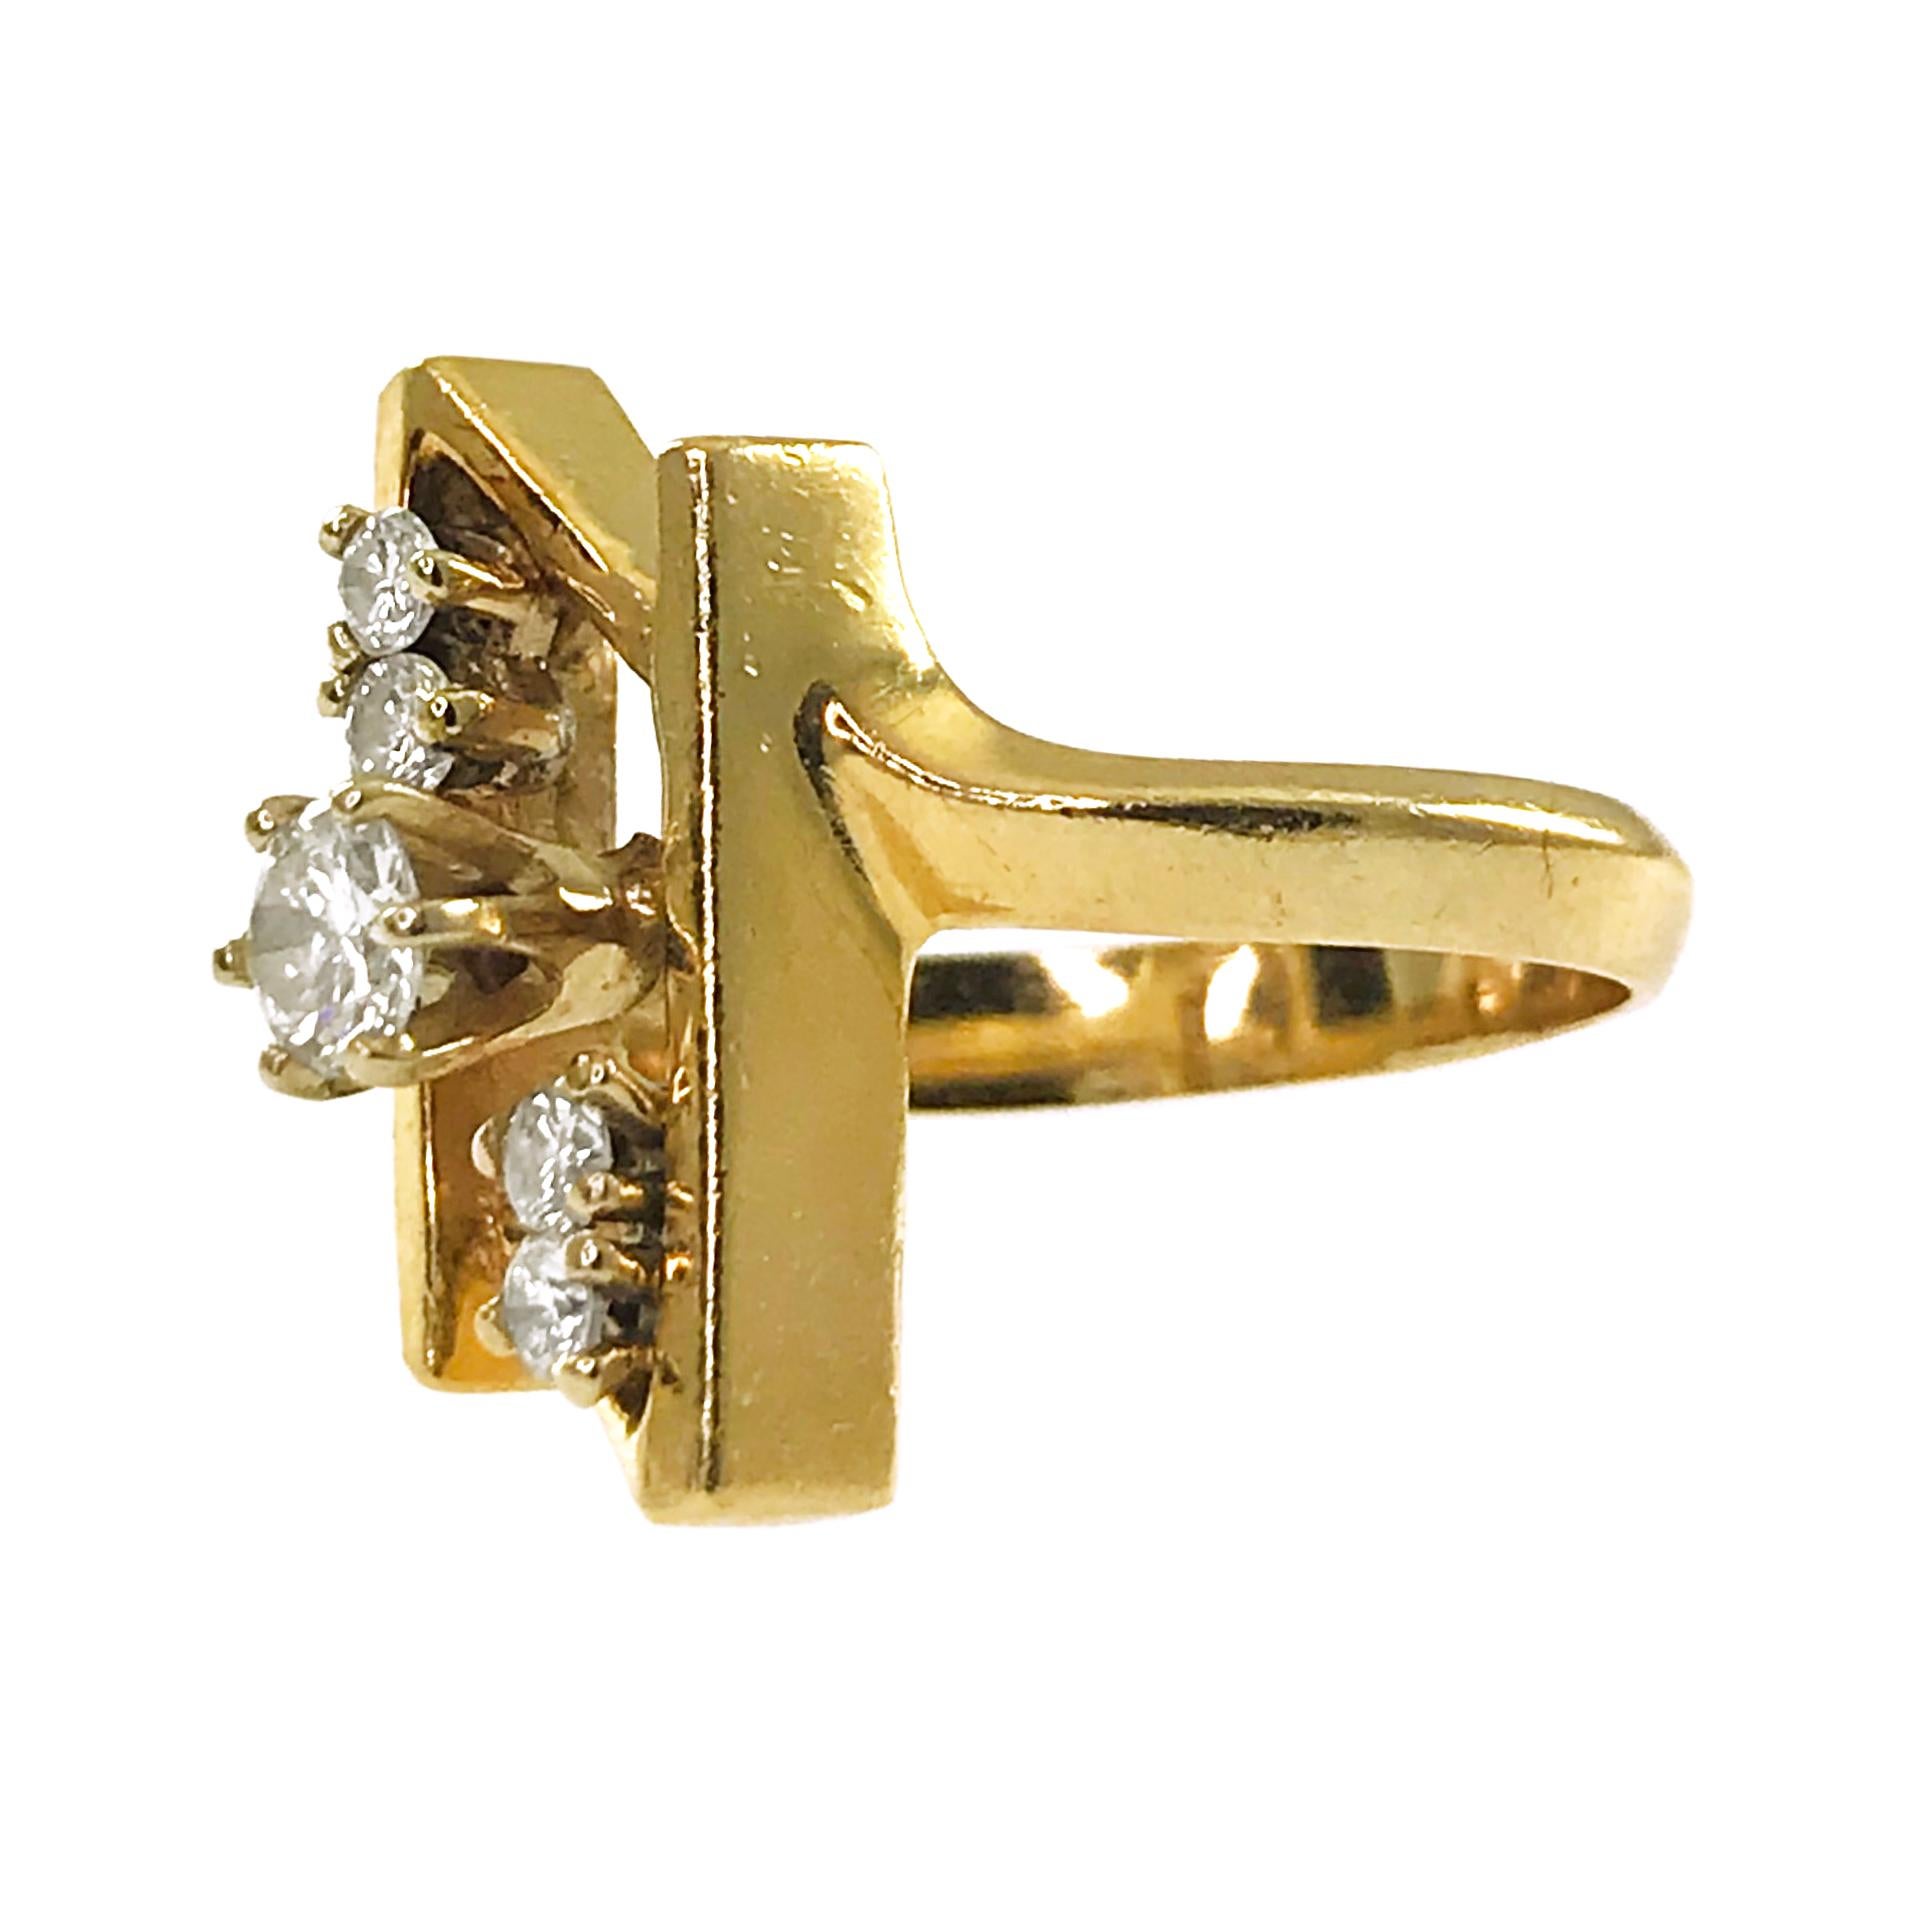 14 Karat Five-Diamond Ring. The ring features two intersecting vertical gold bars with five round diamonds prong-set below. The diamonds are SI1-SI2 in clarity (G.I.A.) and G-H in color (G.I.A.). The center diamond is 3.8mm for a total carat weight